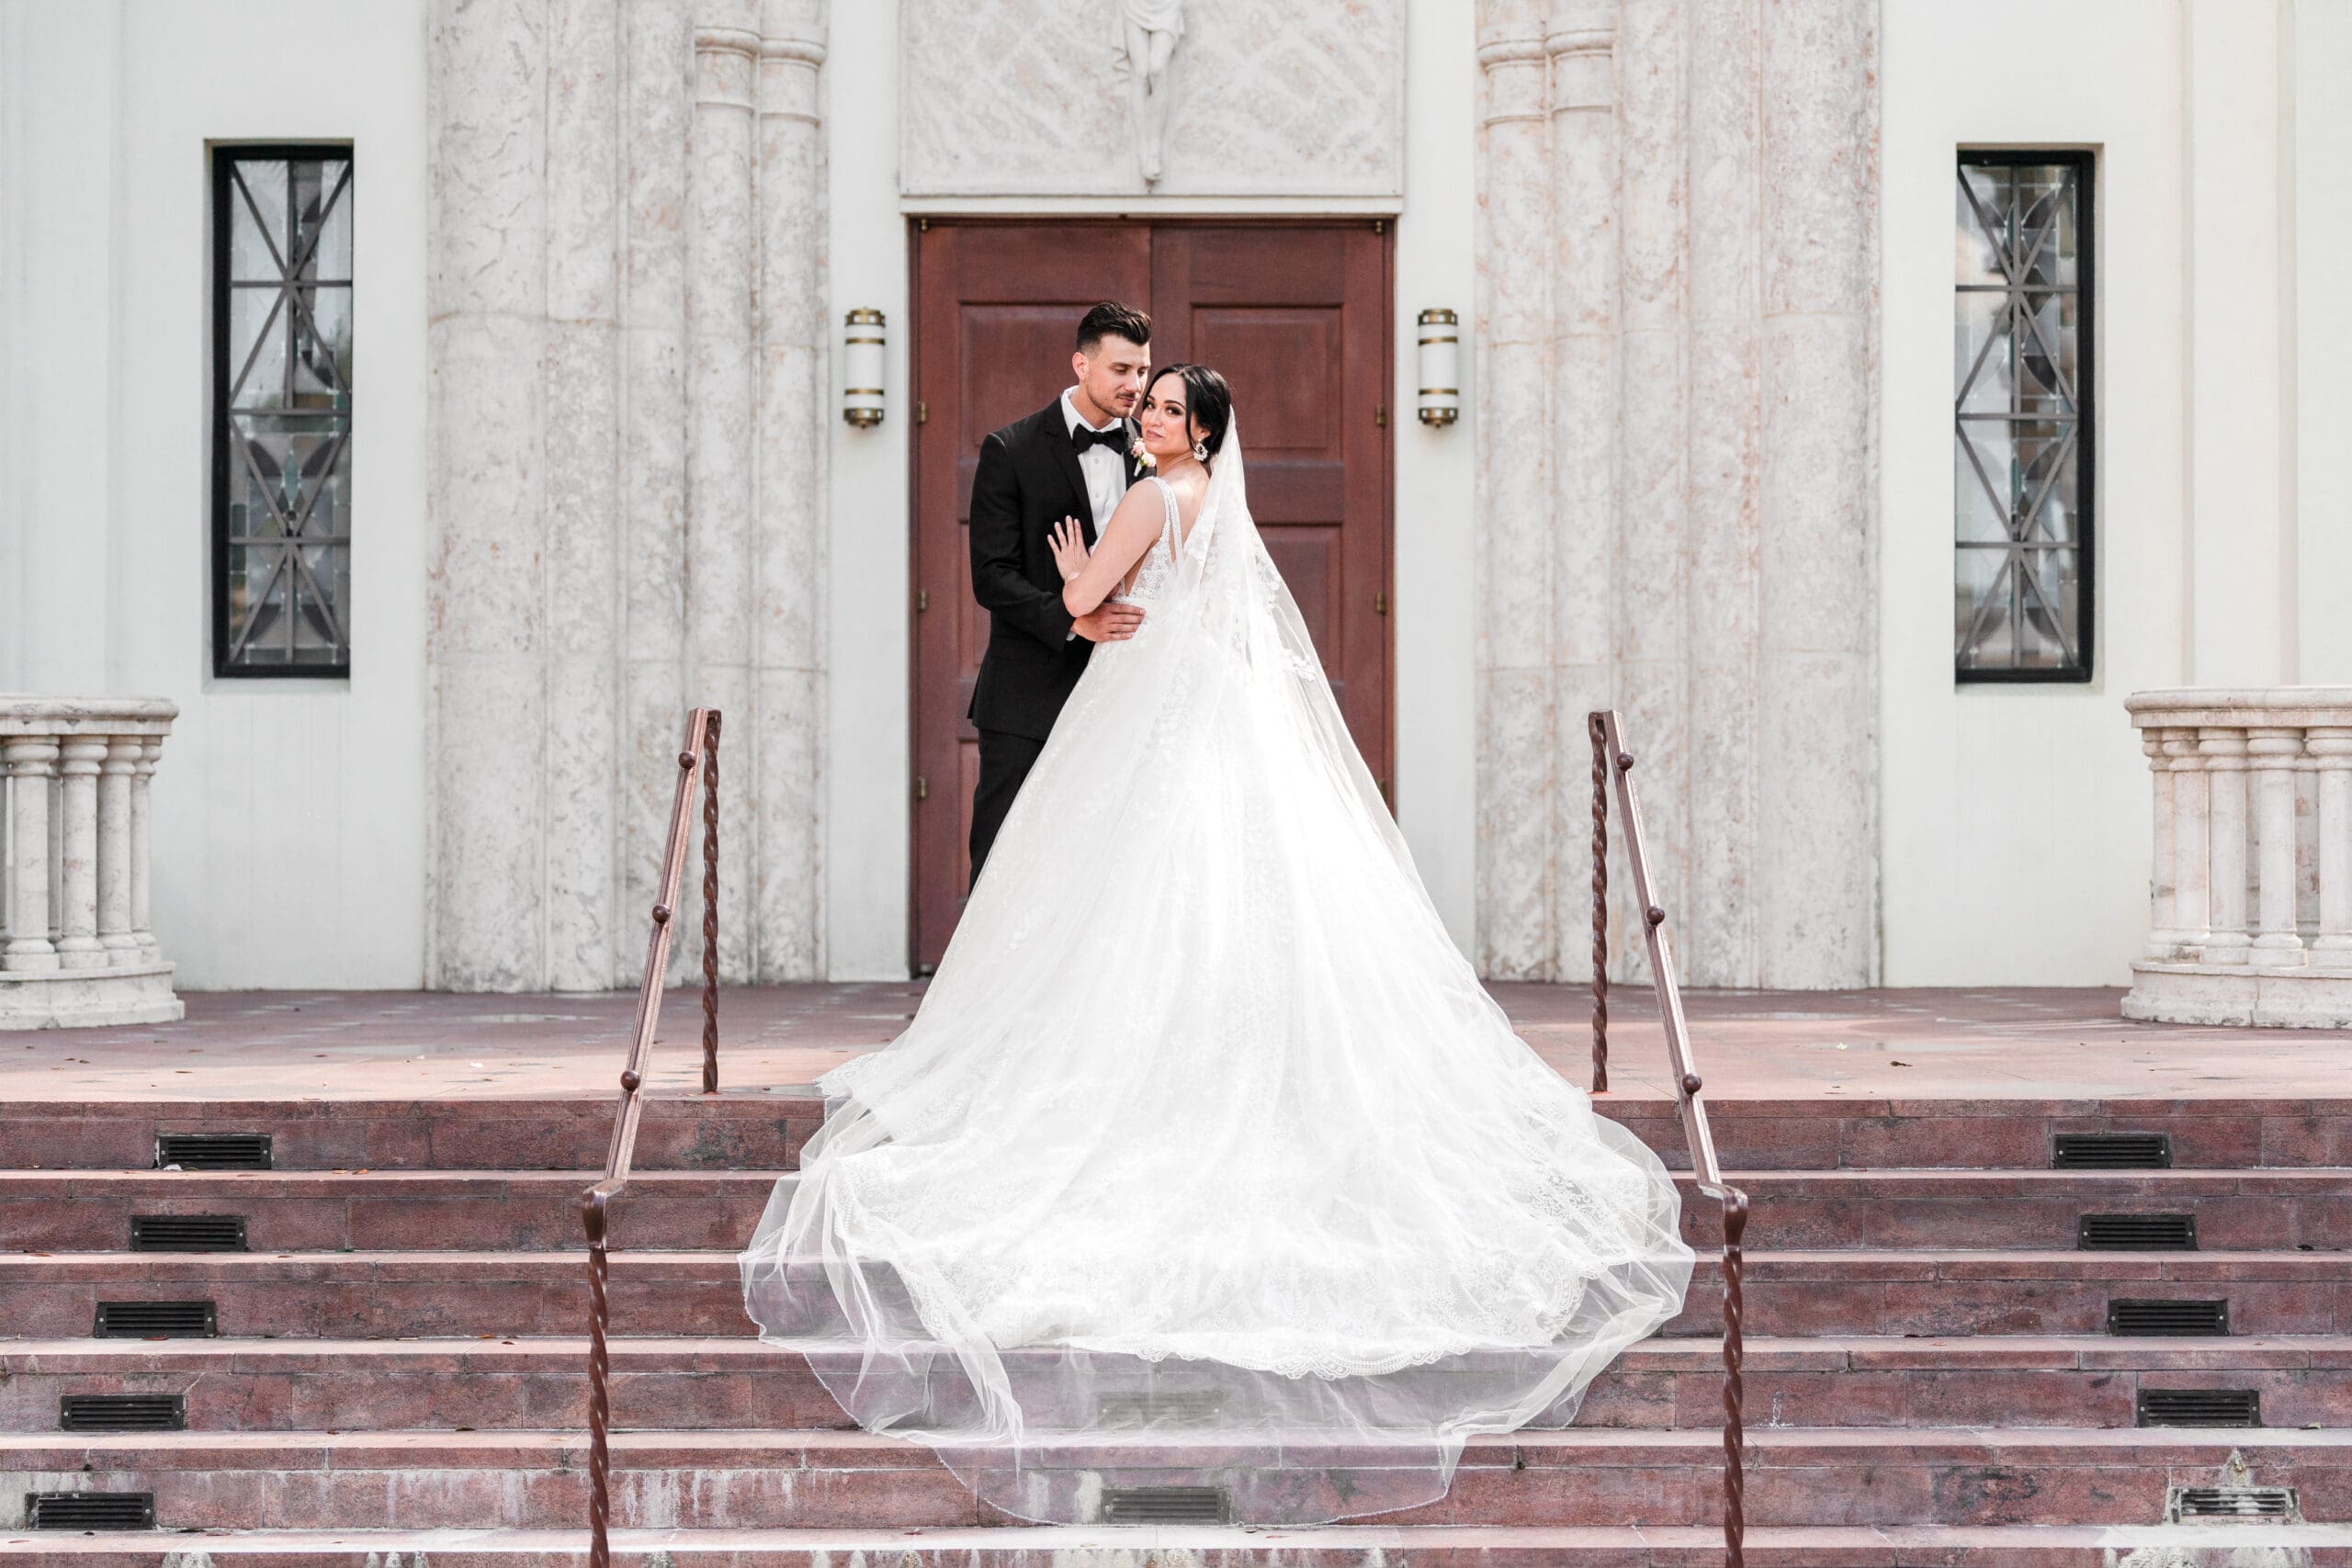 Couple standing on the stairs of a church, with the bride's dress flowing down the steps as they stand at the top, the bride looking at the camera while the husband admires her.